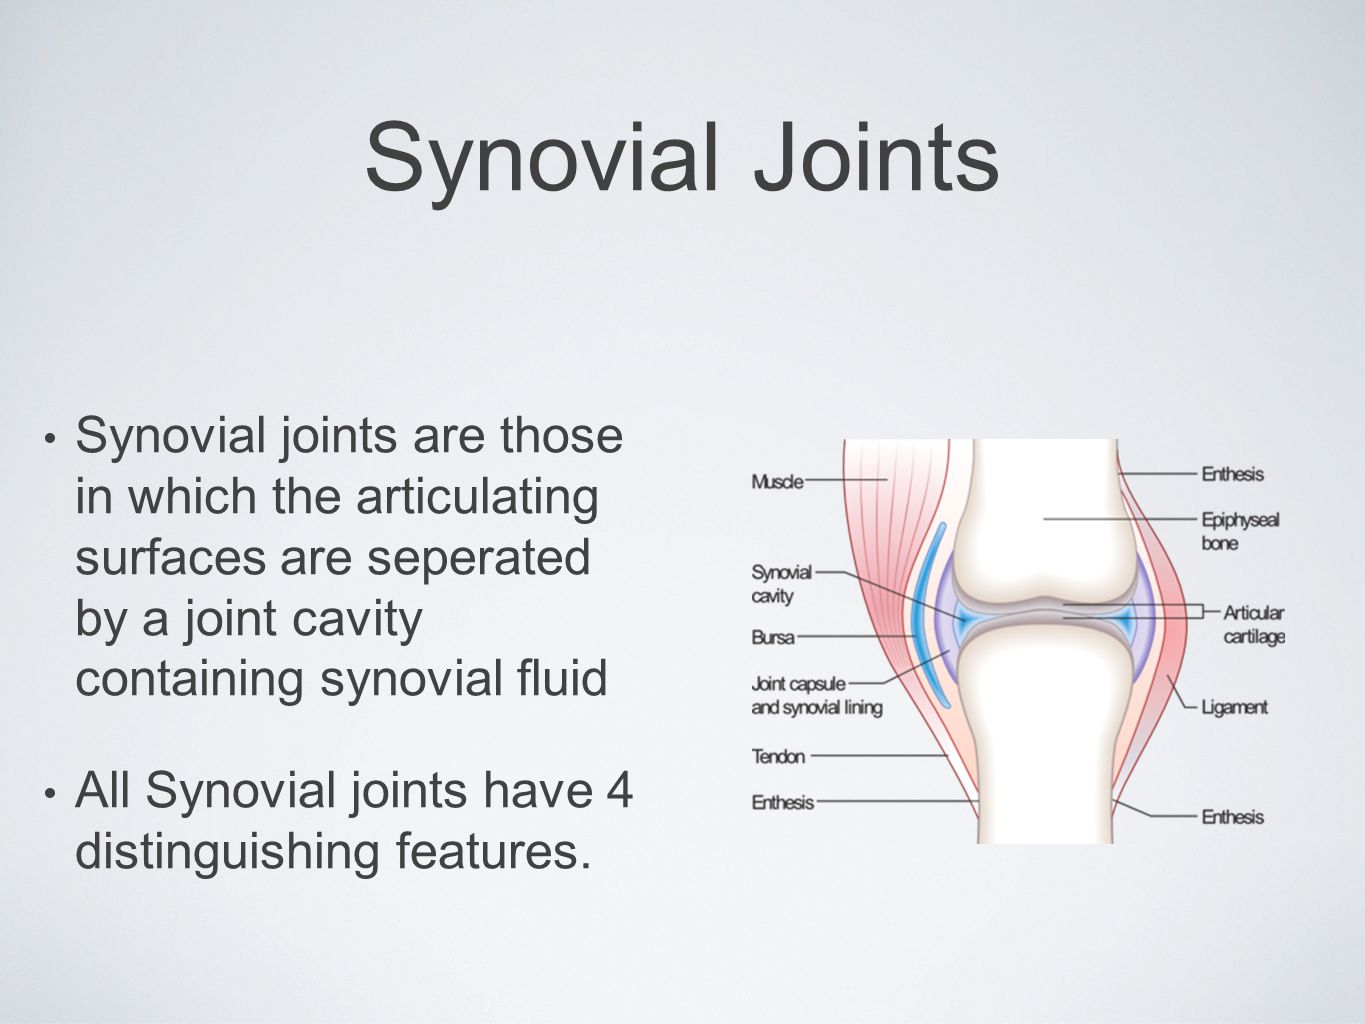 Synovial Joints Synovial joints are those in which the articulating surfaces are seperated by a joint cavity containing synovial fluid.